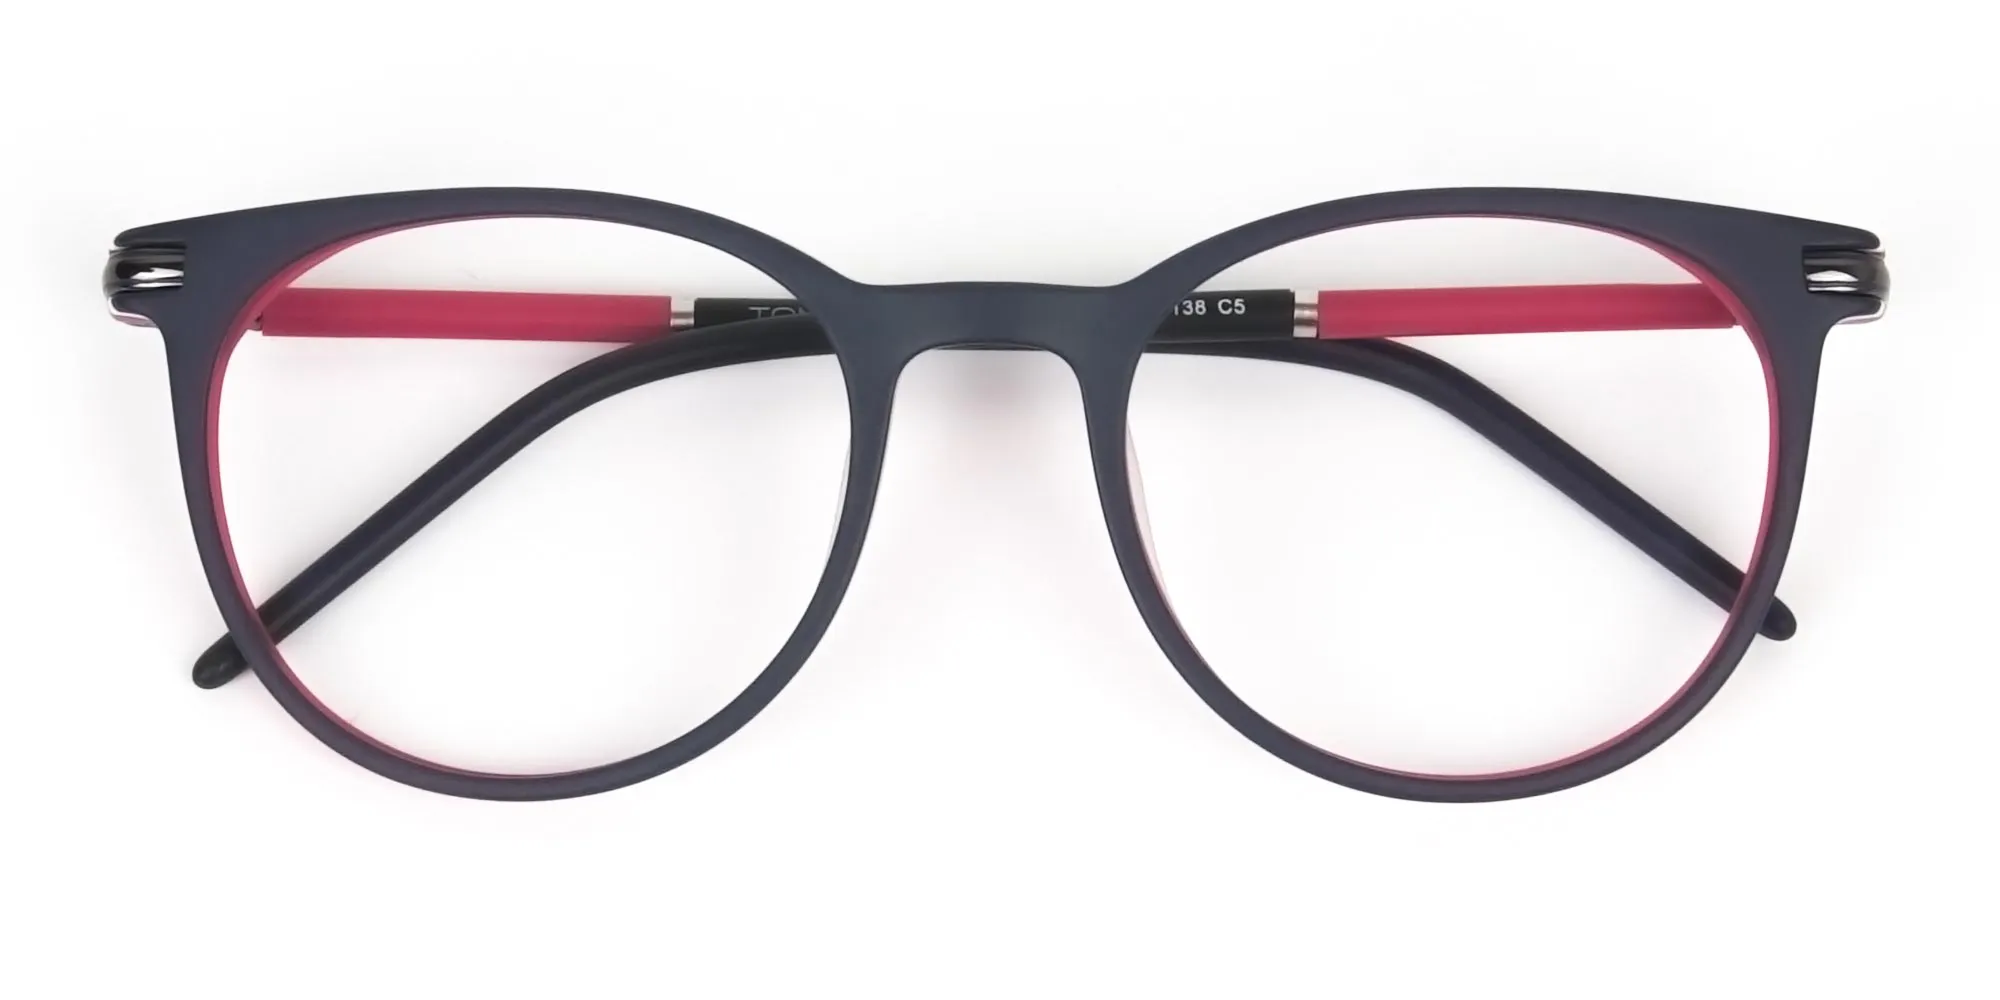 Navy Blue & Red Round Spectacles in Acetate - 2